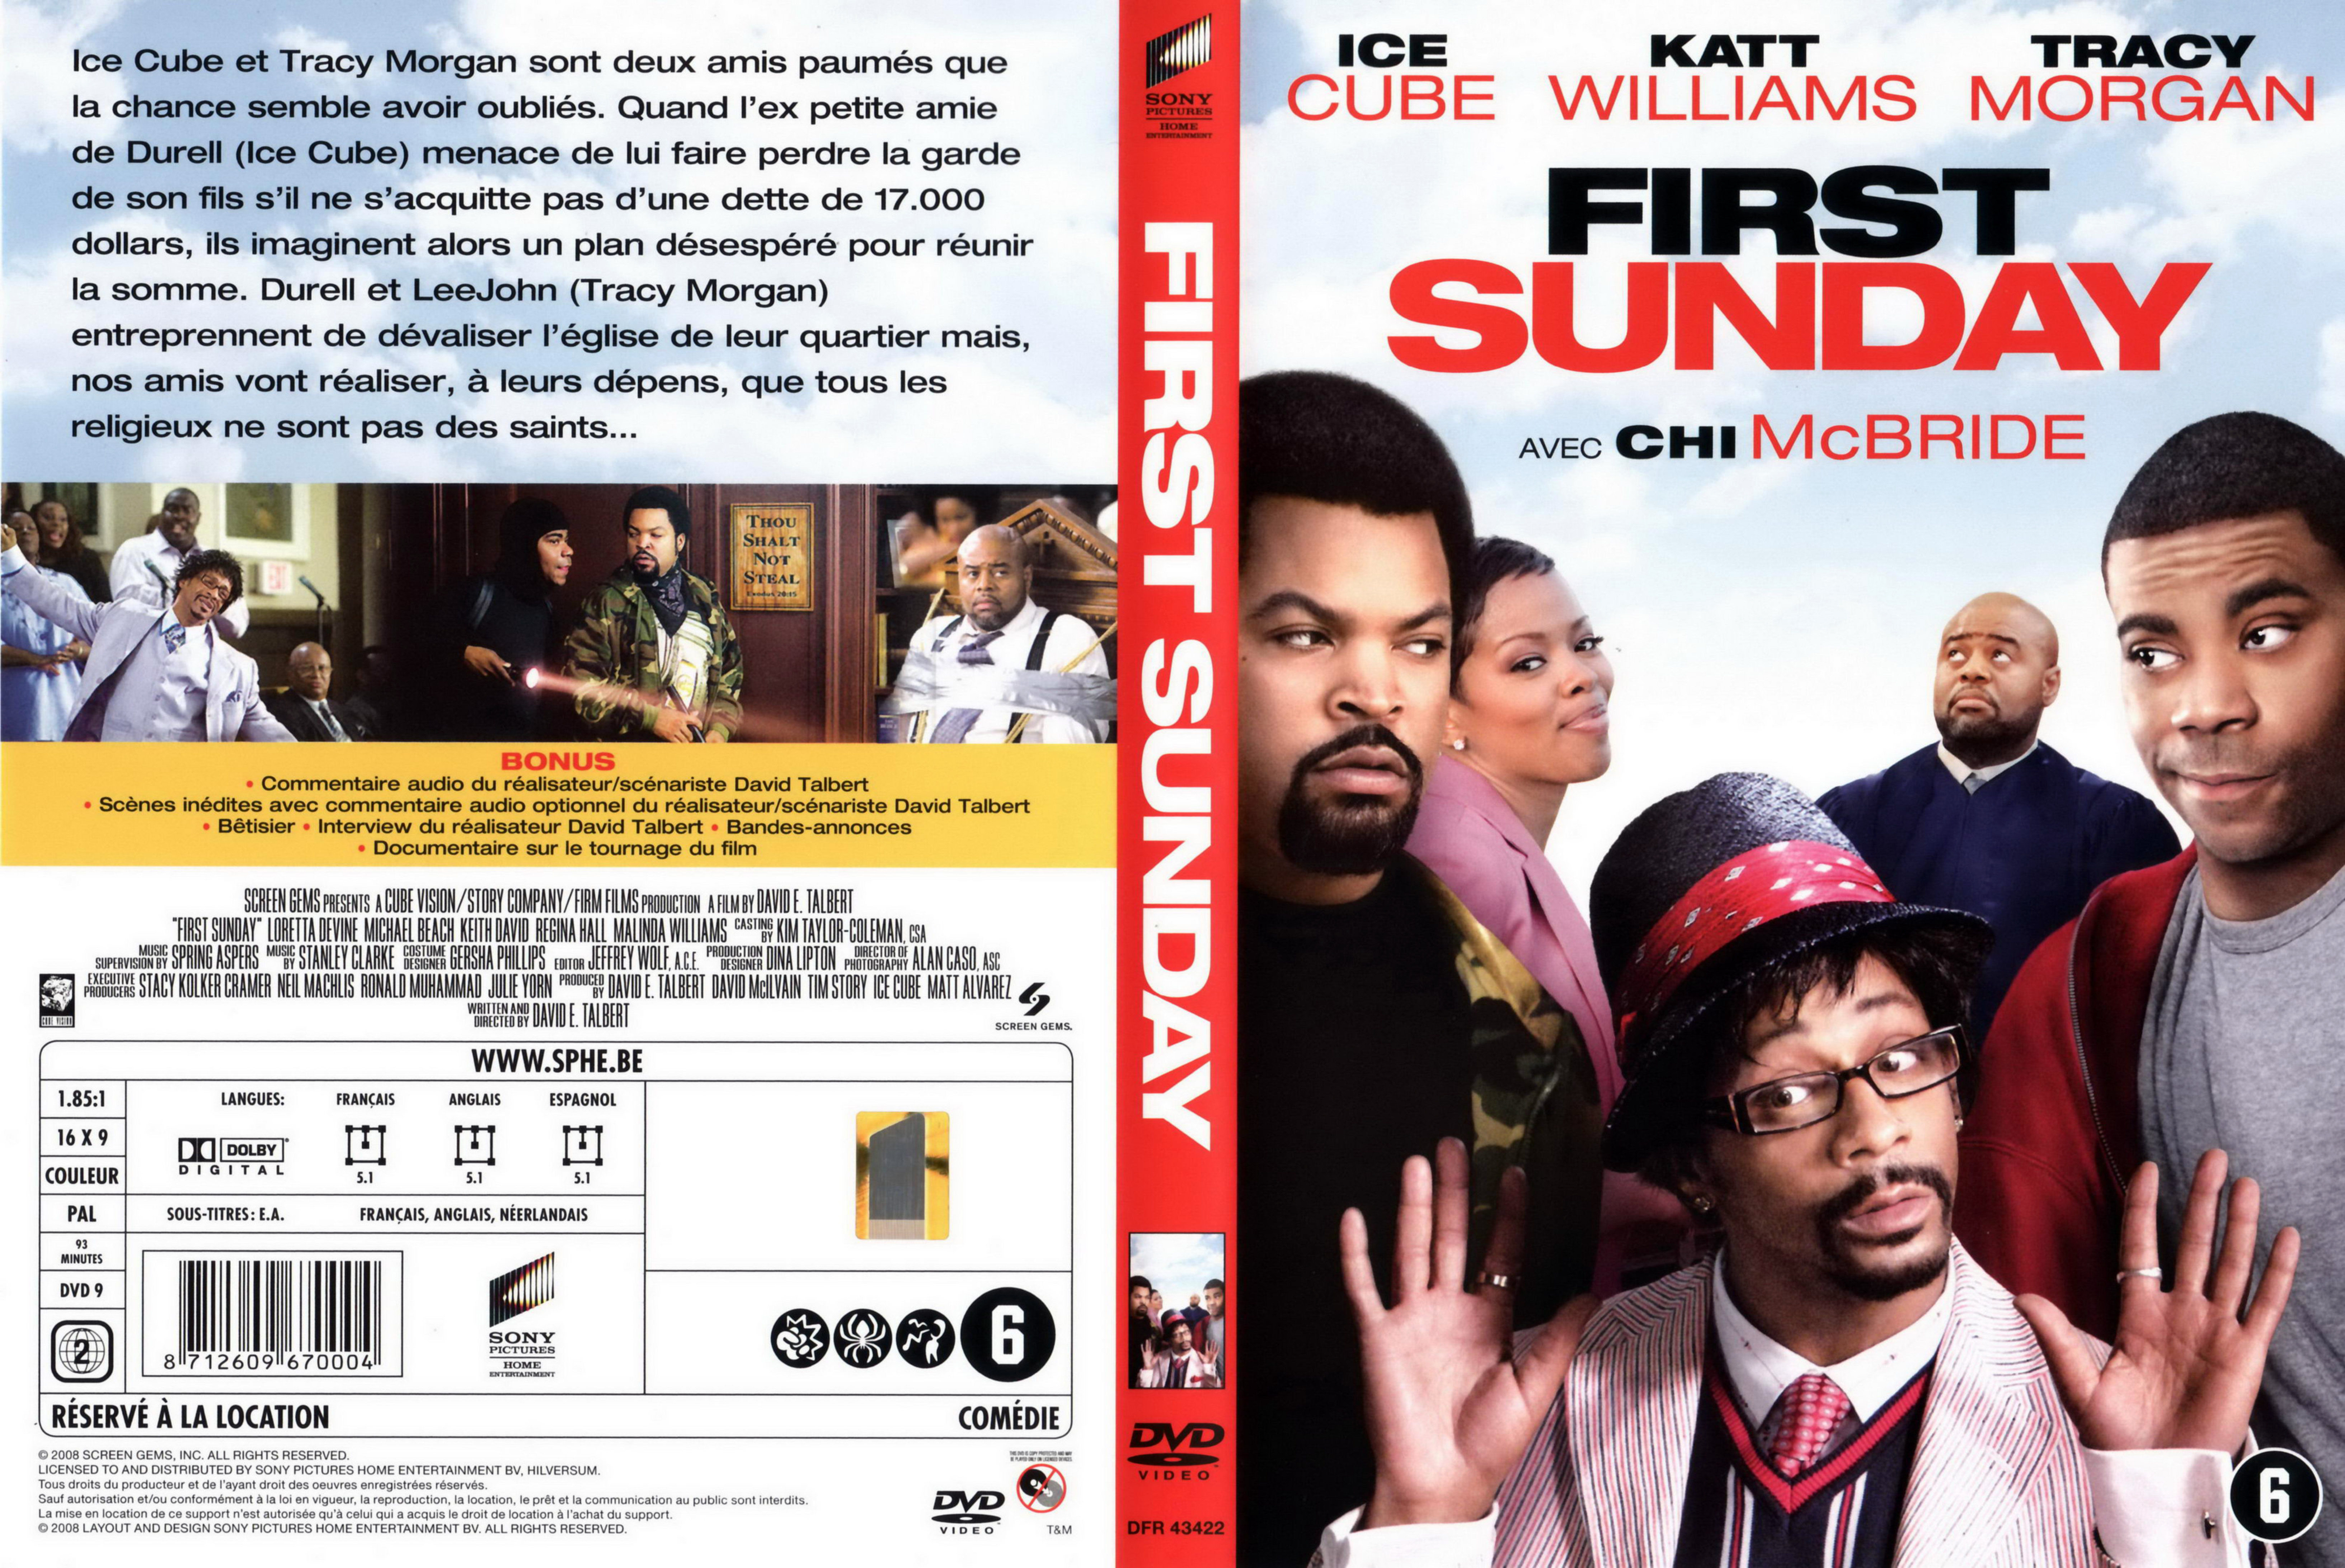 Jaquette DVD First sunday